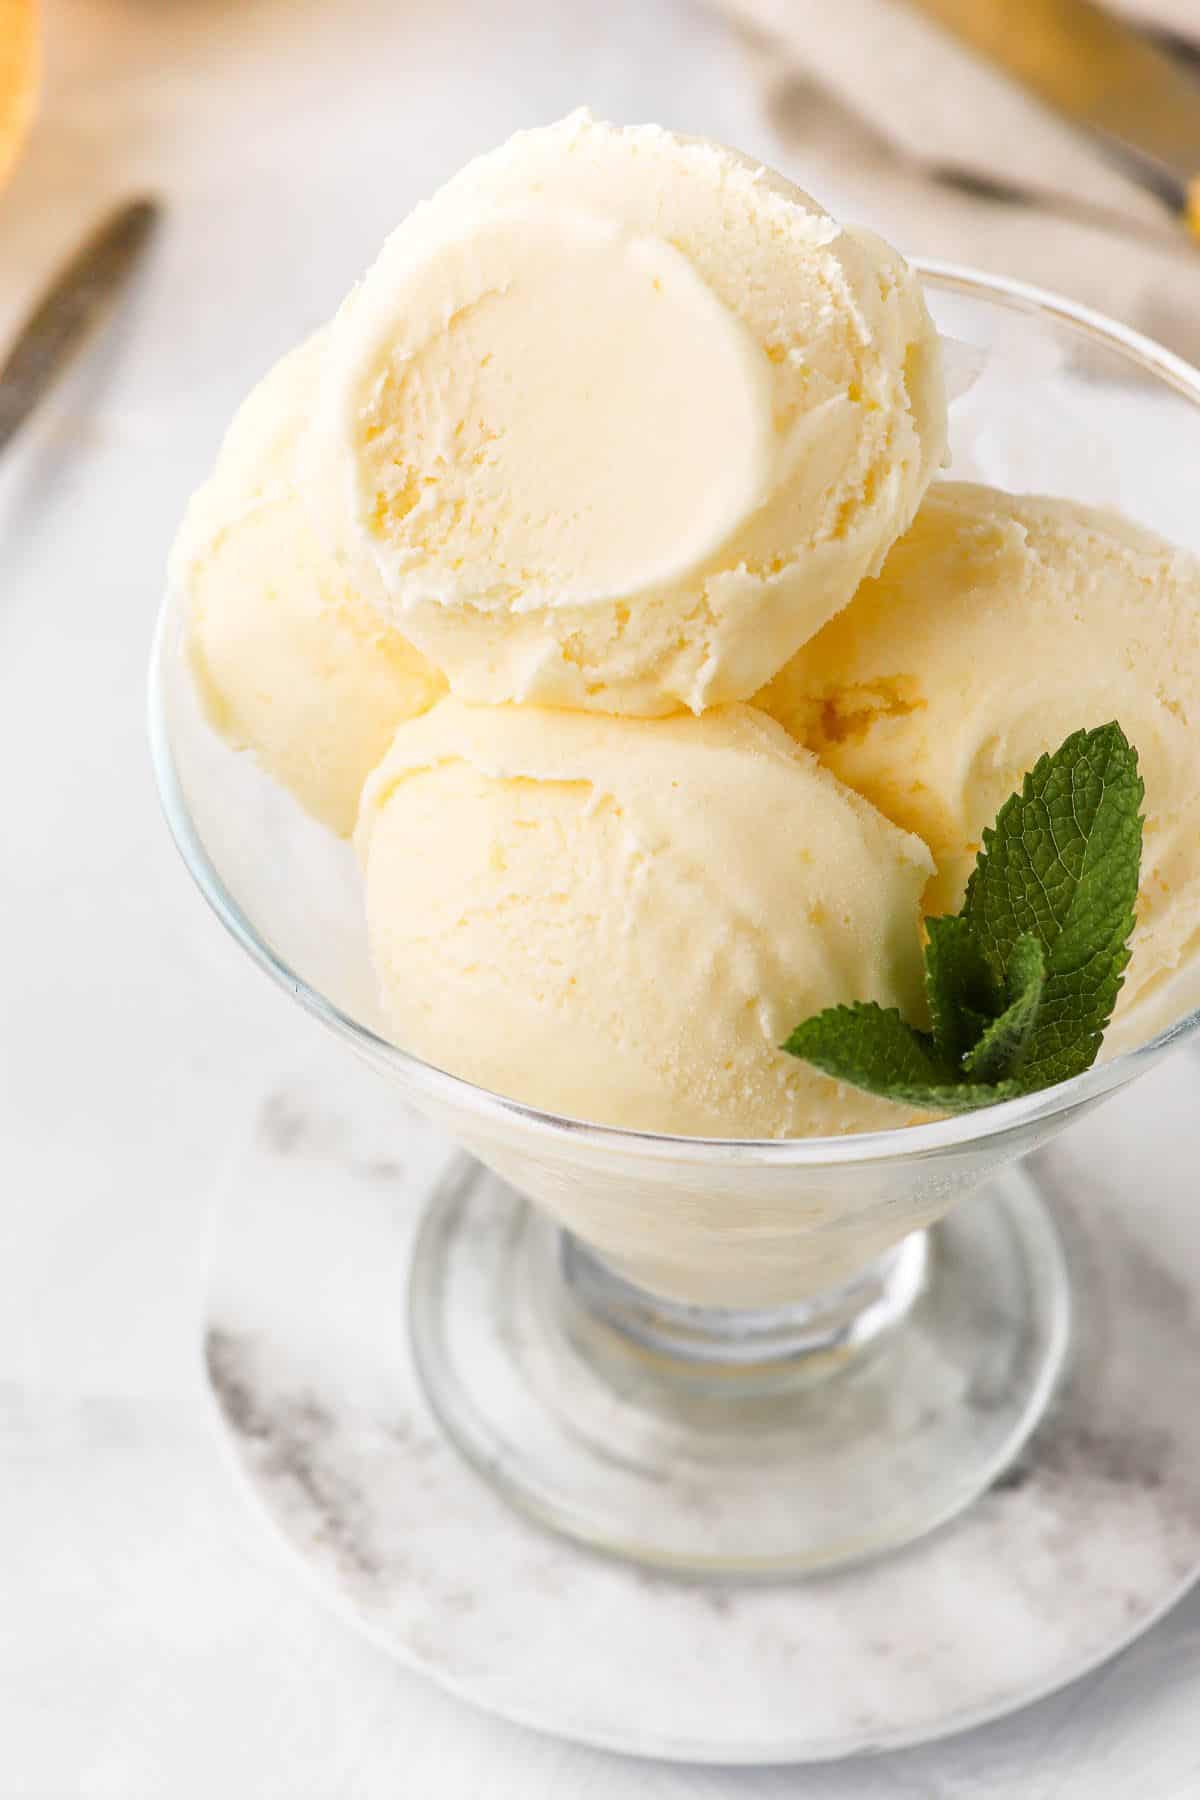 Scoops of ice cream in a glass dish, garnished with mint.